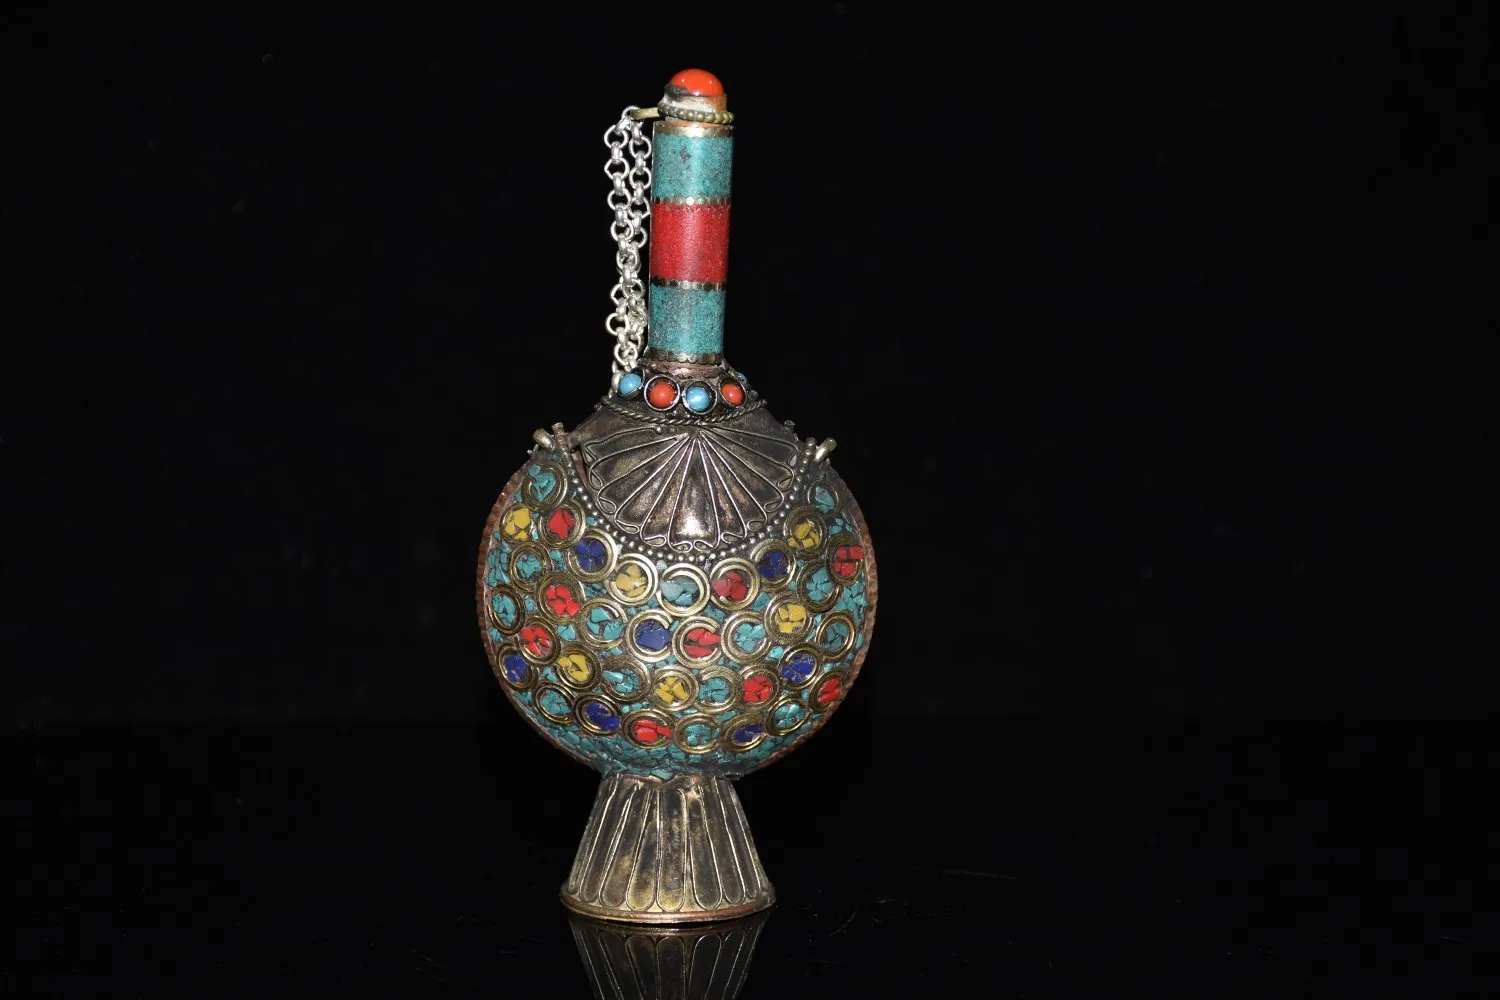 

Exquisite Antique Reflux Lnlaid Red Pine And Turquoise Snuff Bottle Ornament